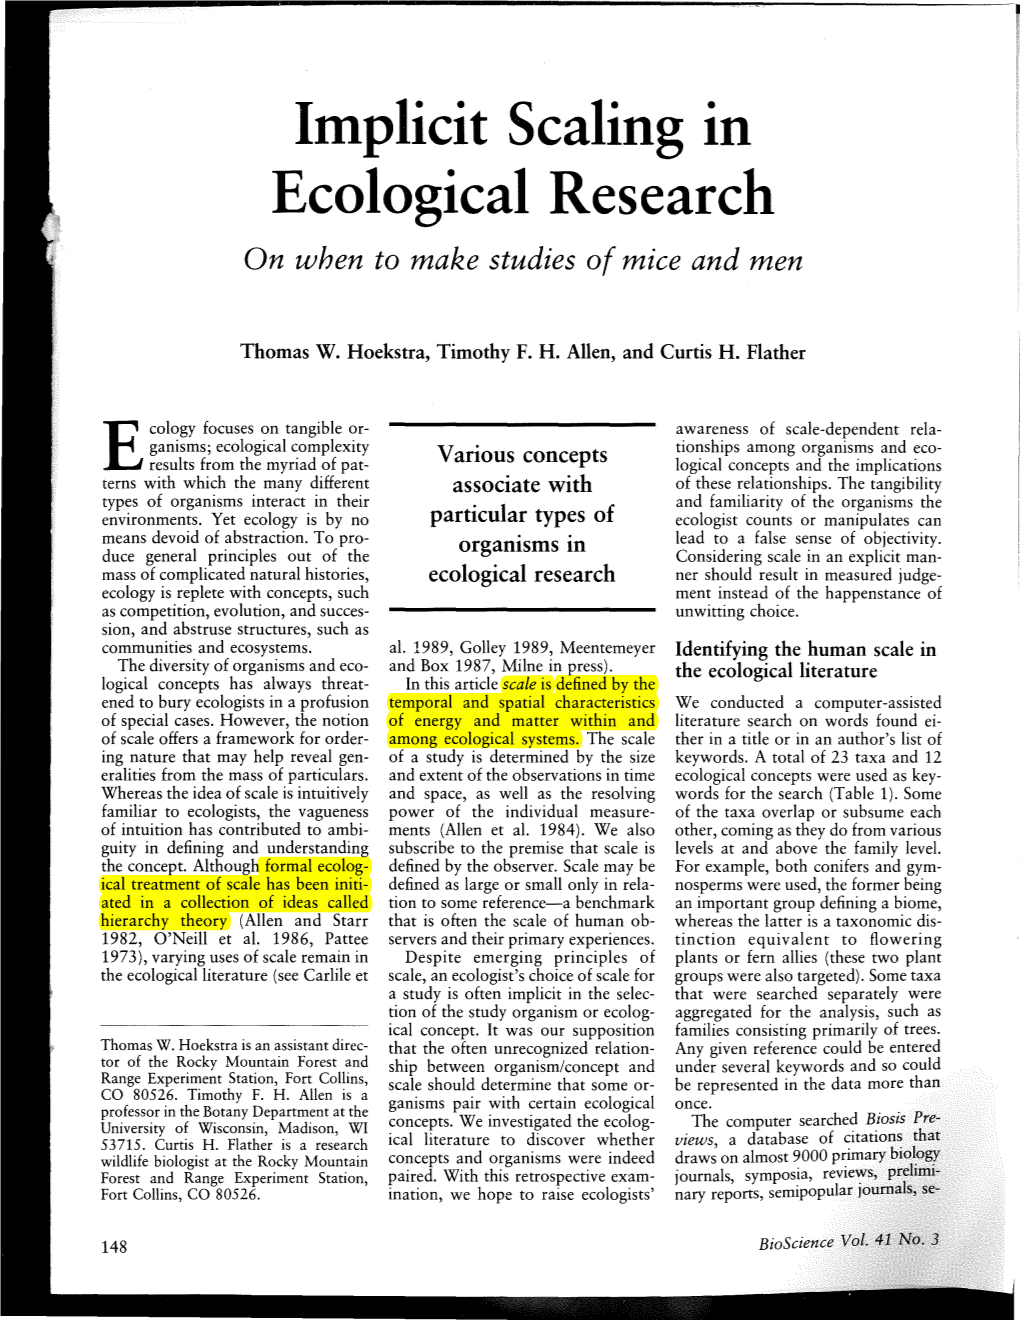 Implicit Scaling in Ecological Research on When to Make Studies of Mice and Men